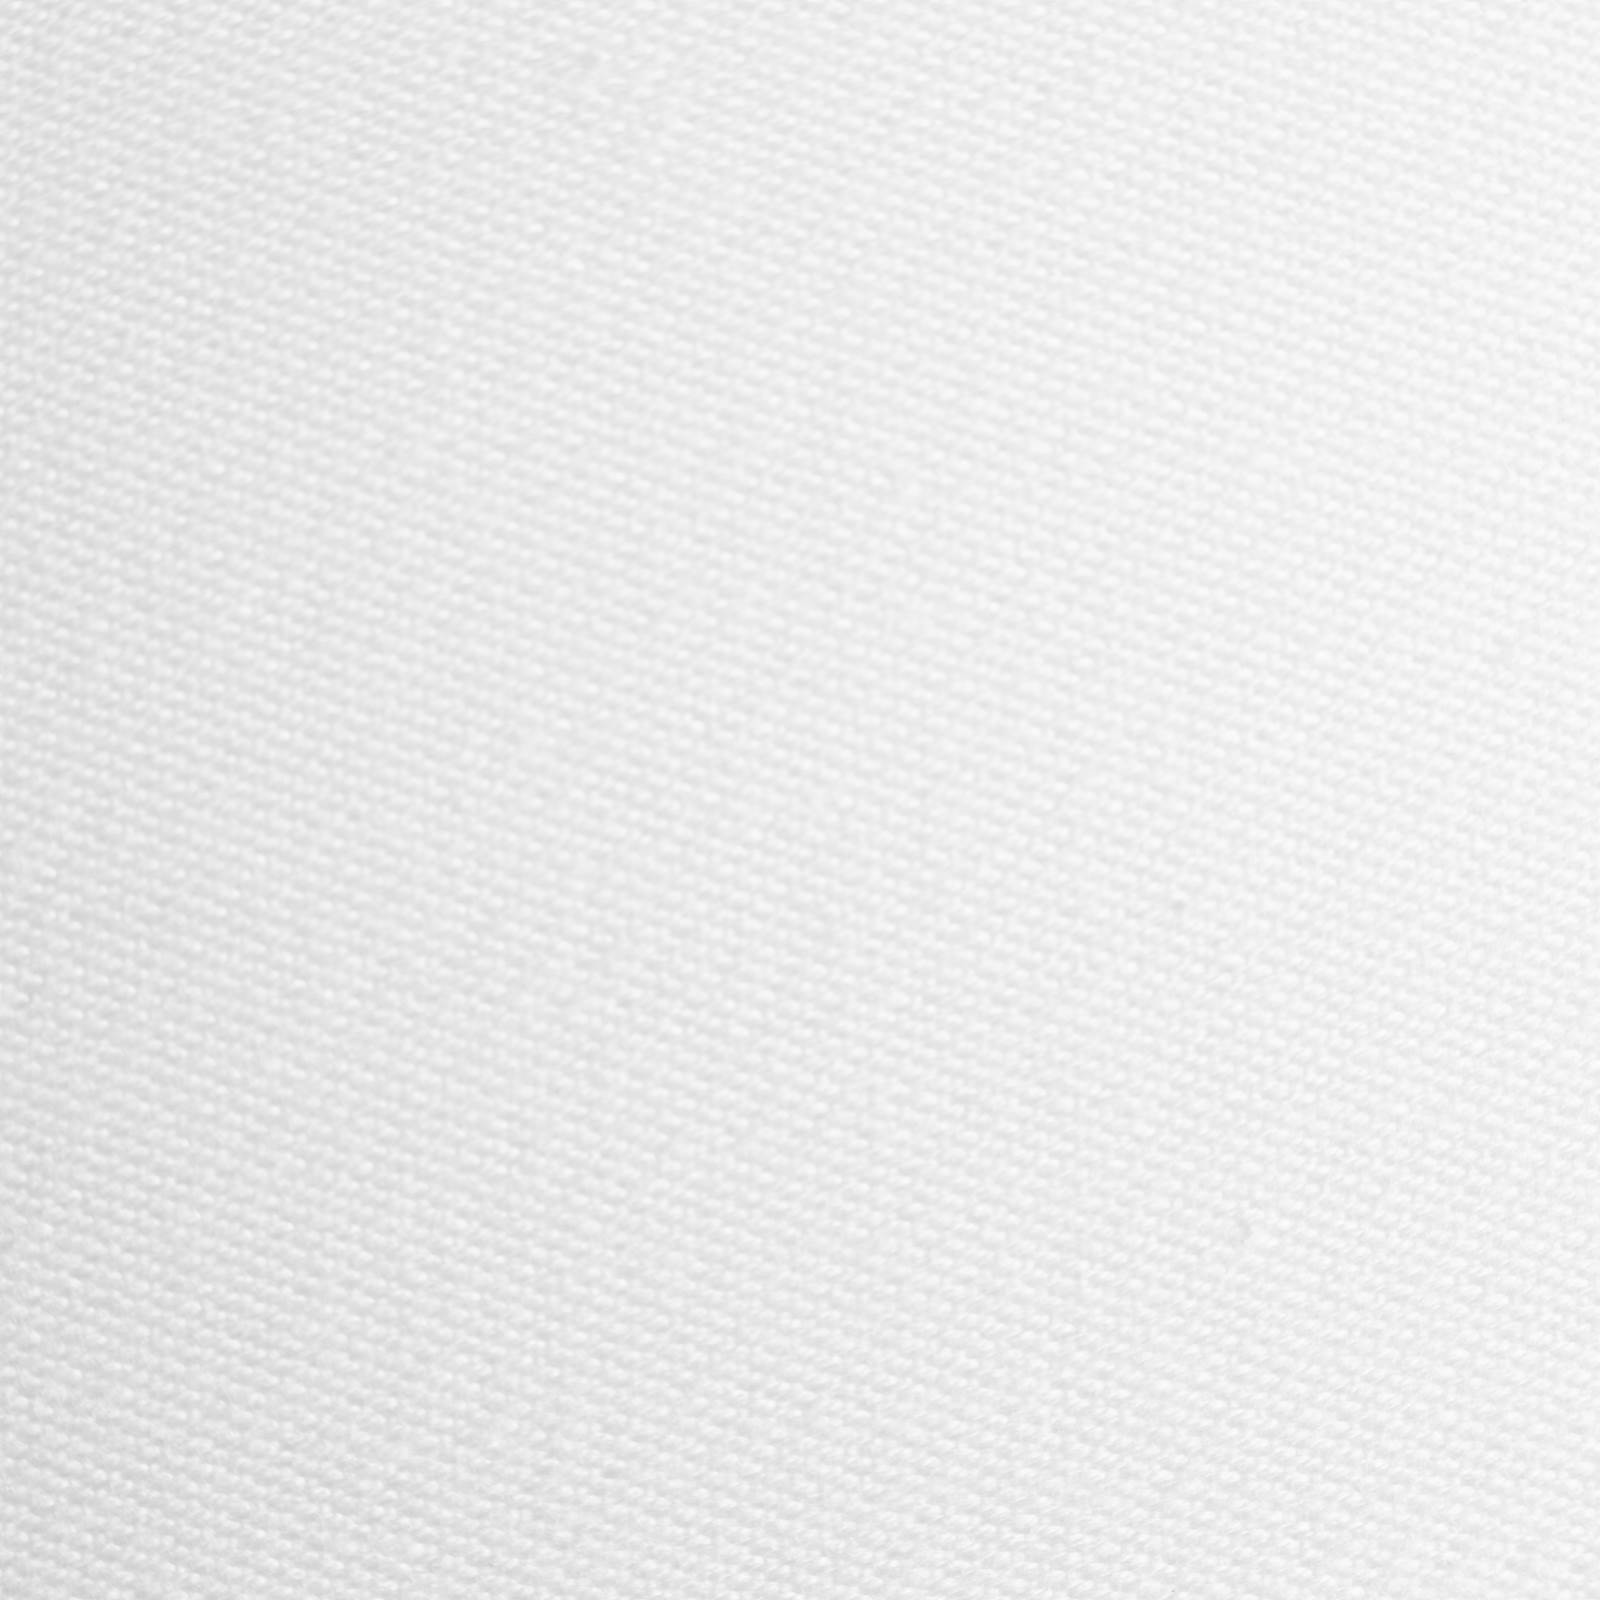 Vera - two-ply damask fabric - Indanthren® coloration (white)